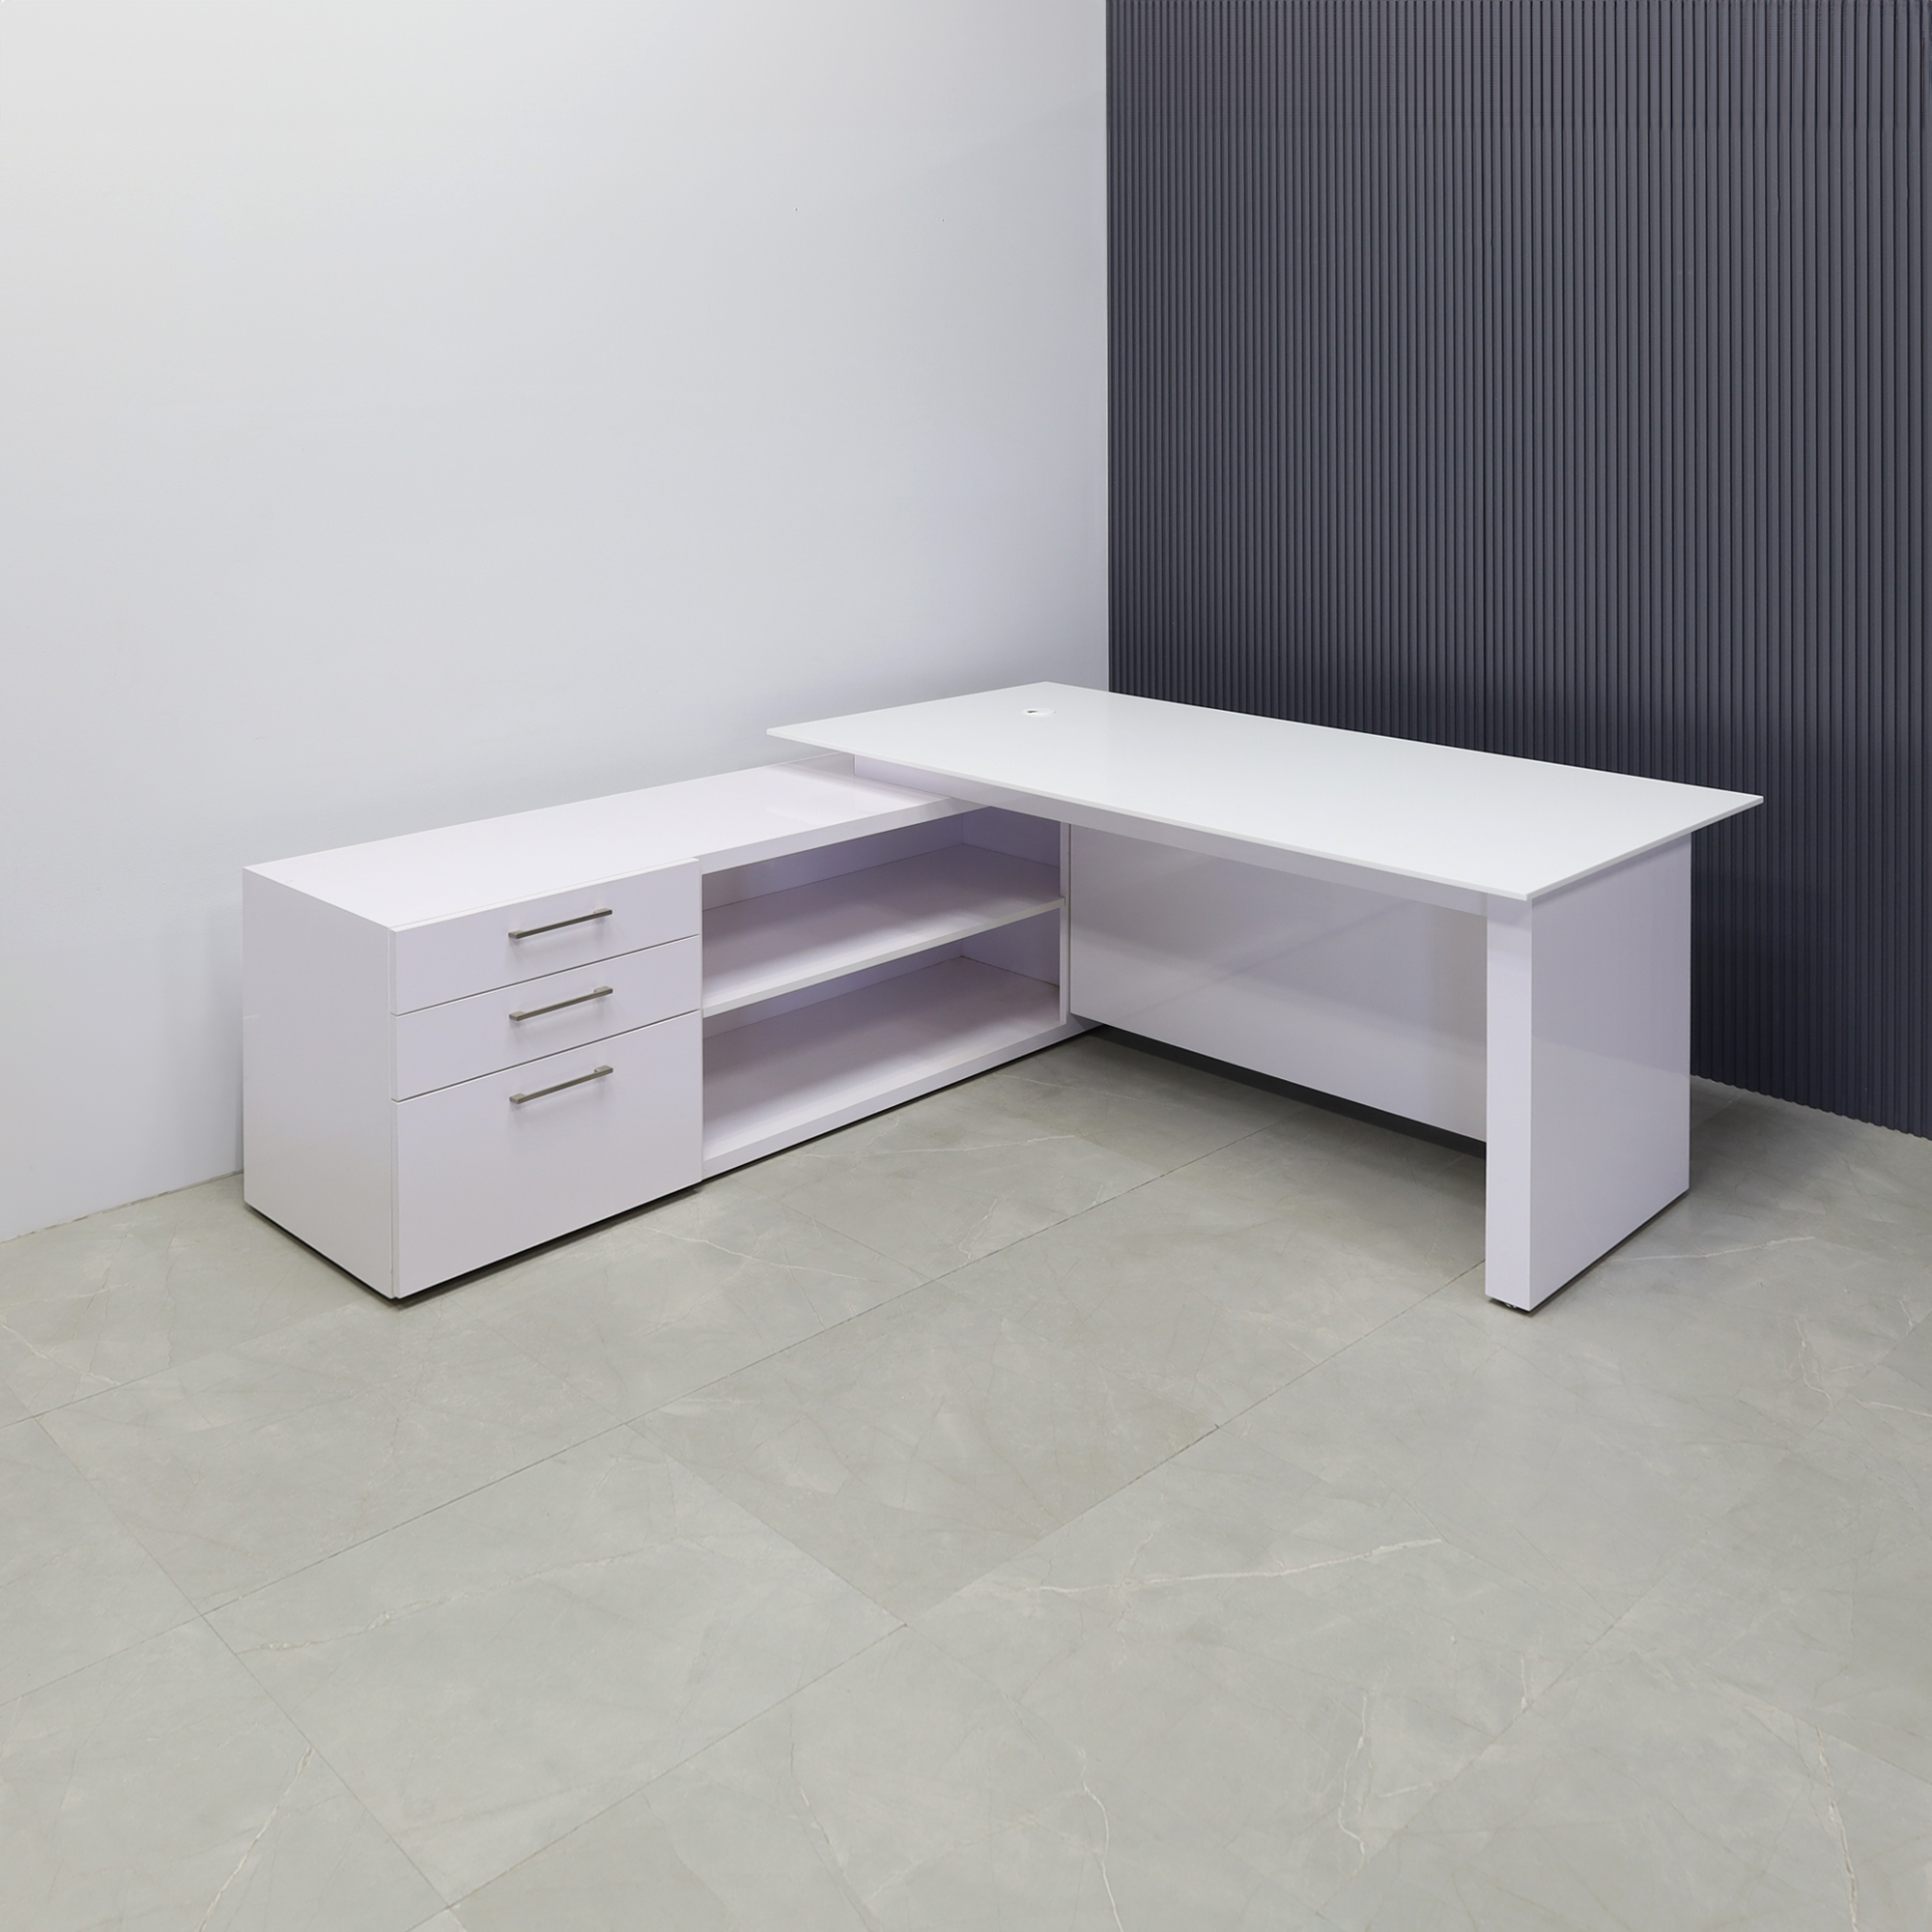 72 inches Avenue Straight W/ Cabinet Executive Desk in White Solid Engineered Stone Top and white gloss laminate base and credenza, with two pencil drawers, one file cabinets and one shelf shown here.